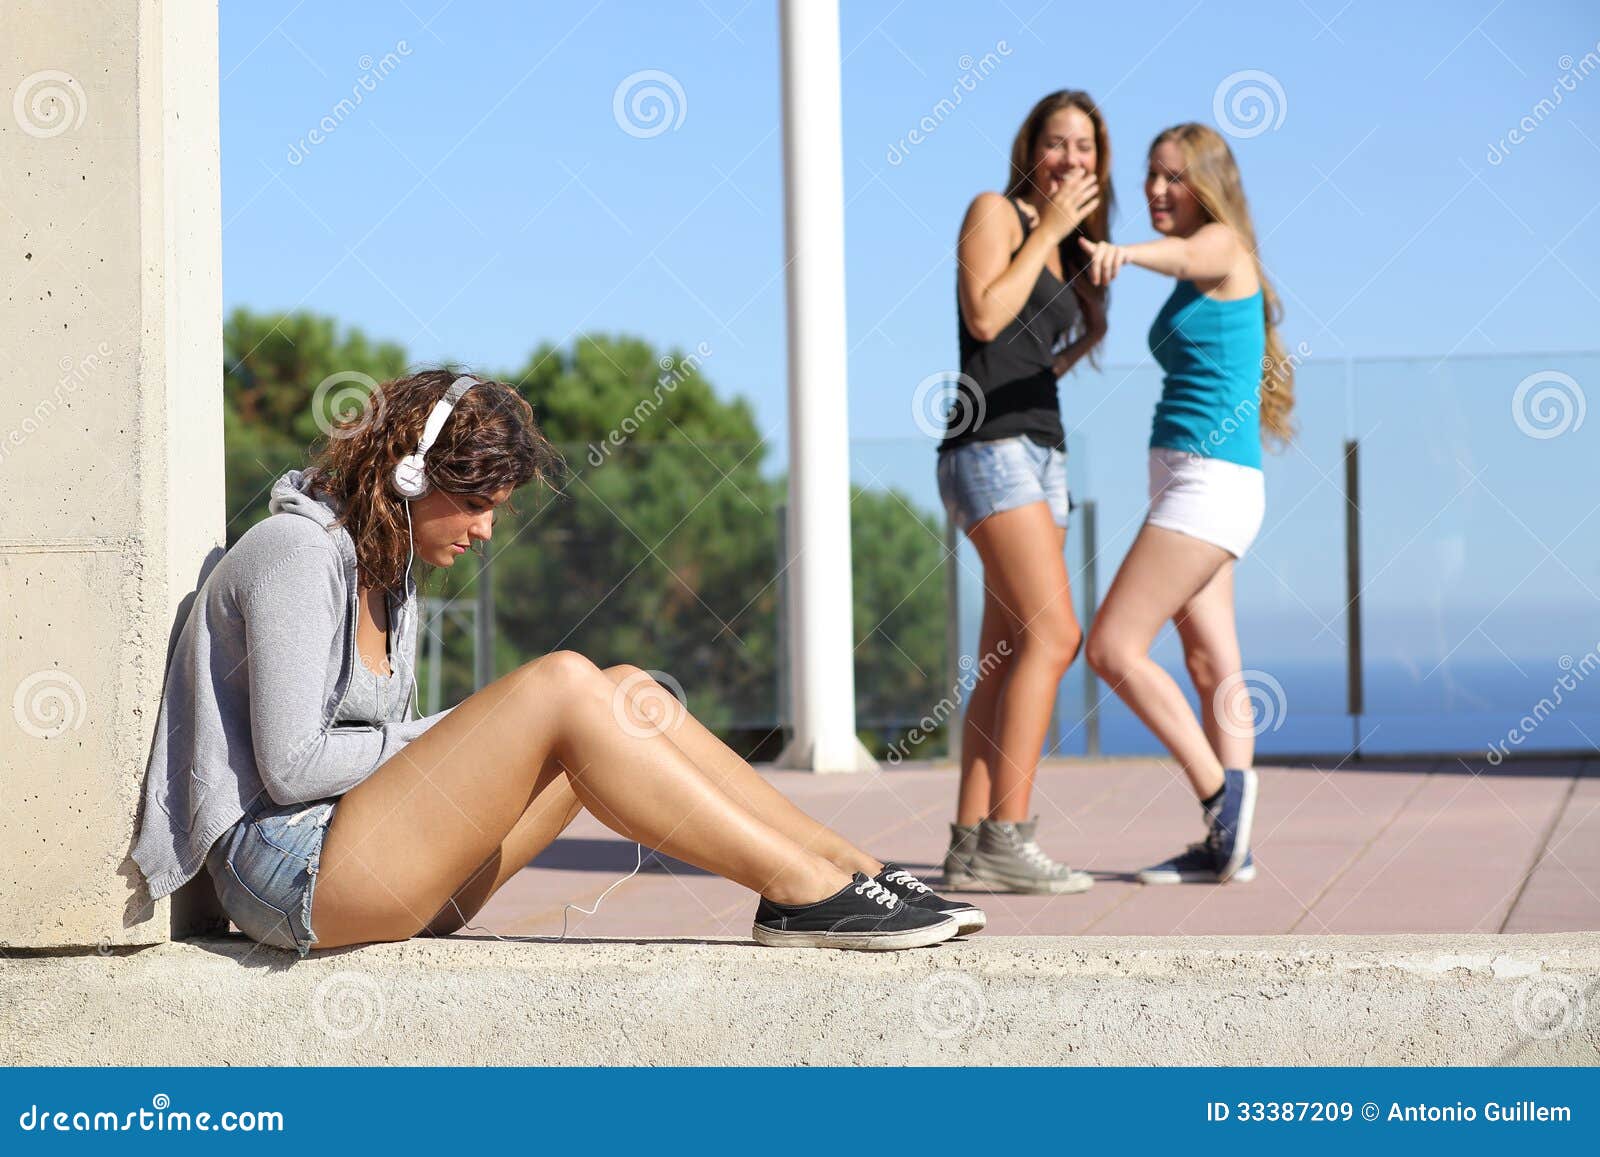 two teen girls bullying another one